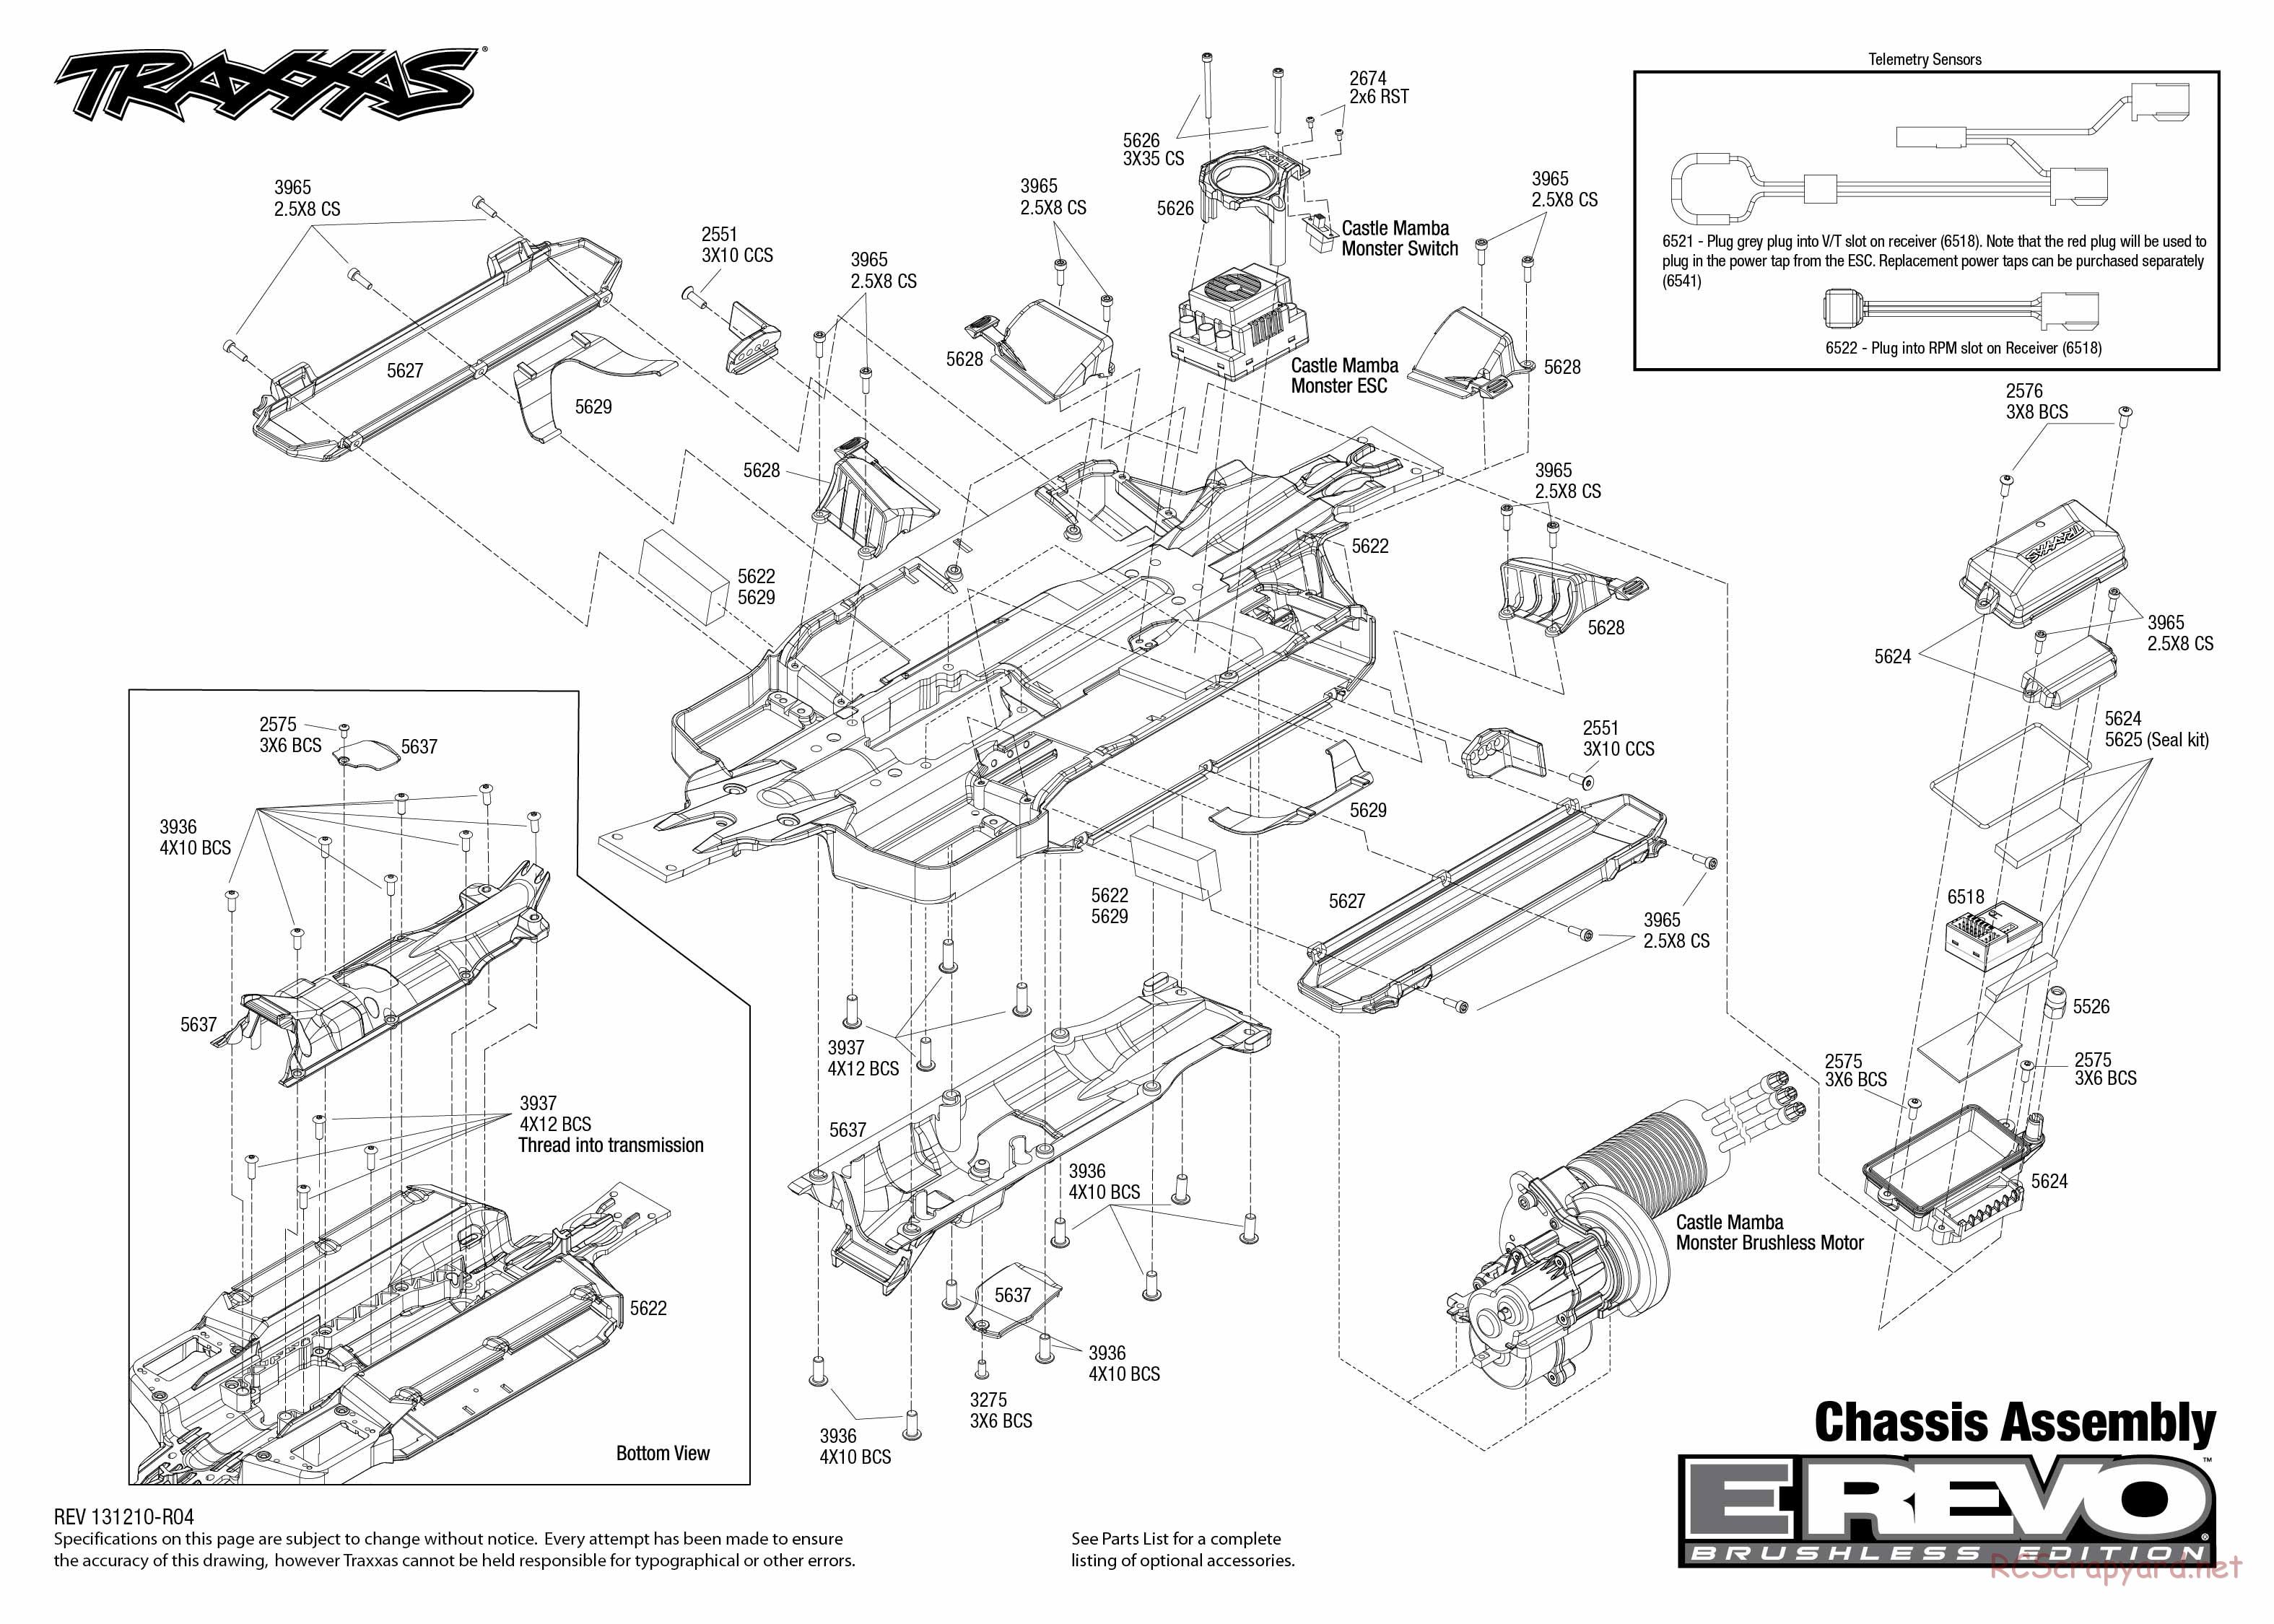 Traxxas - E-Revo Brushless (2009) - Exploded Views - Page 1